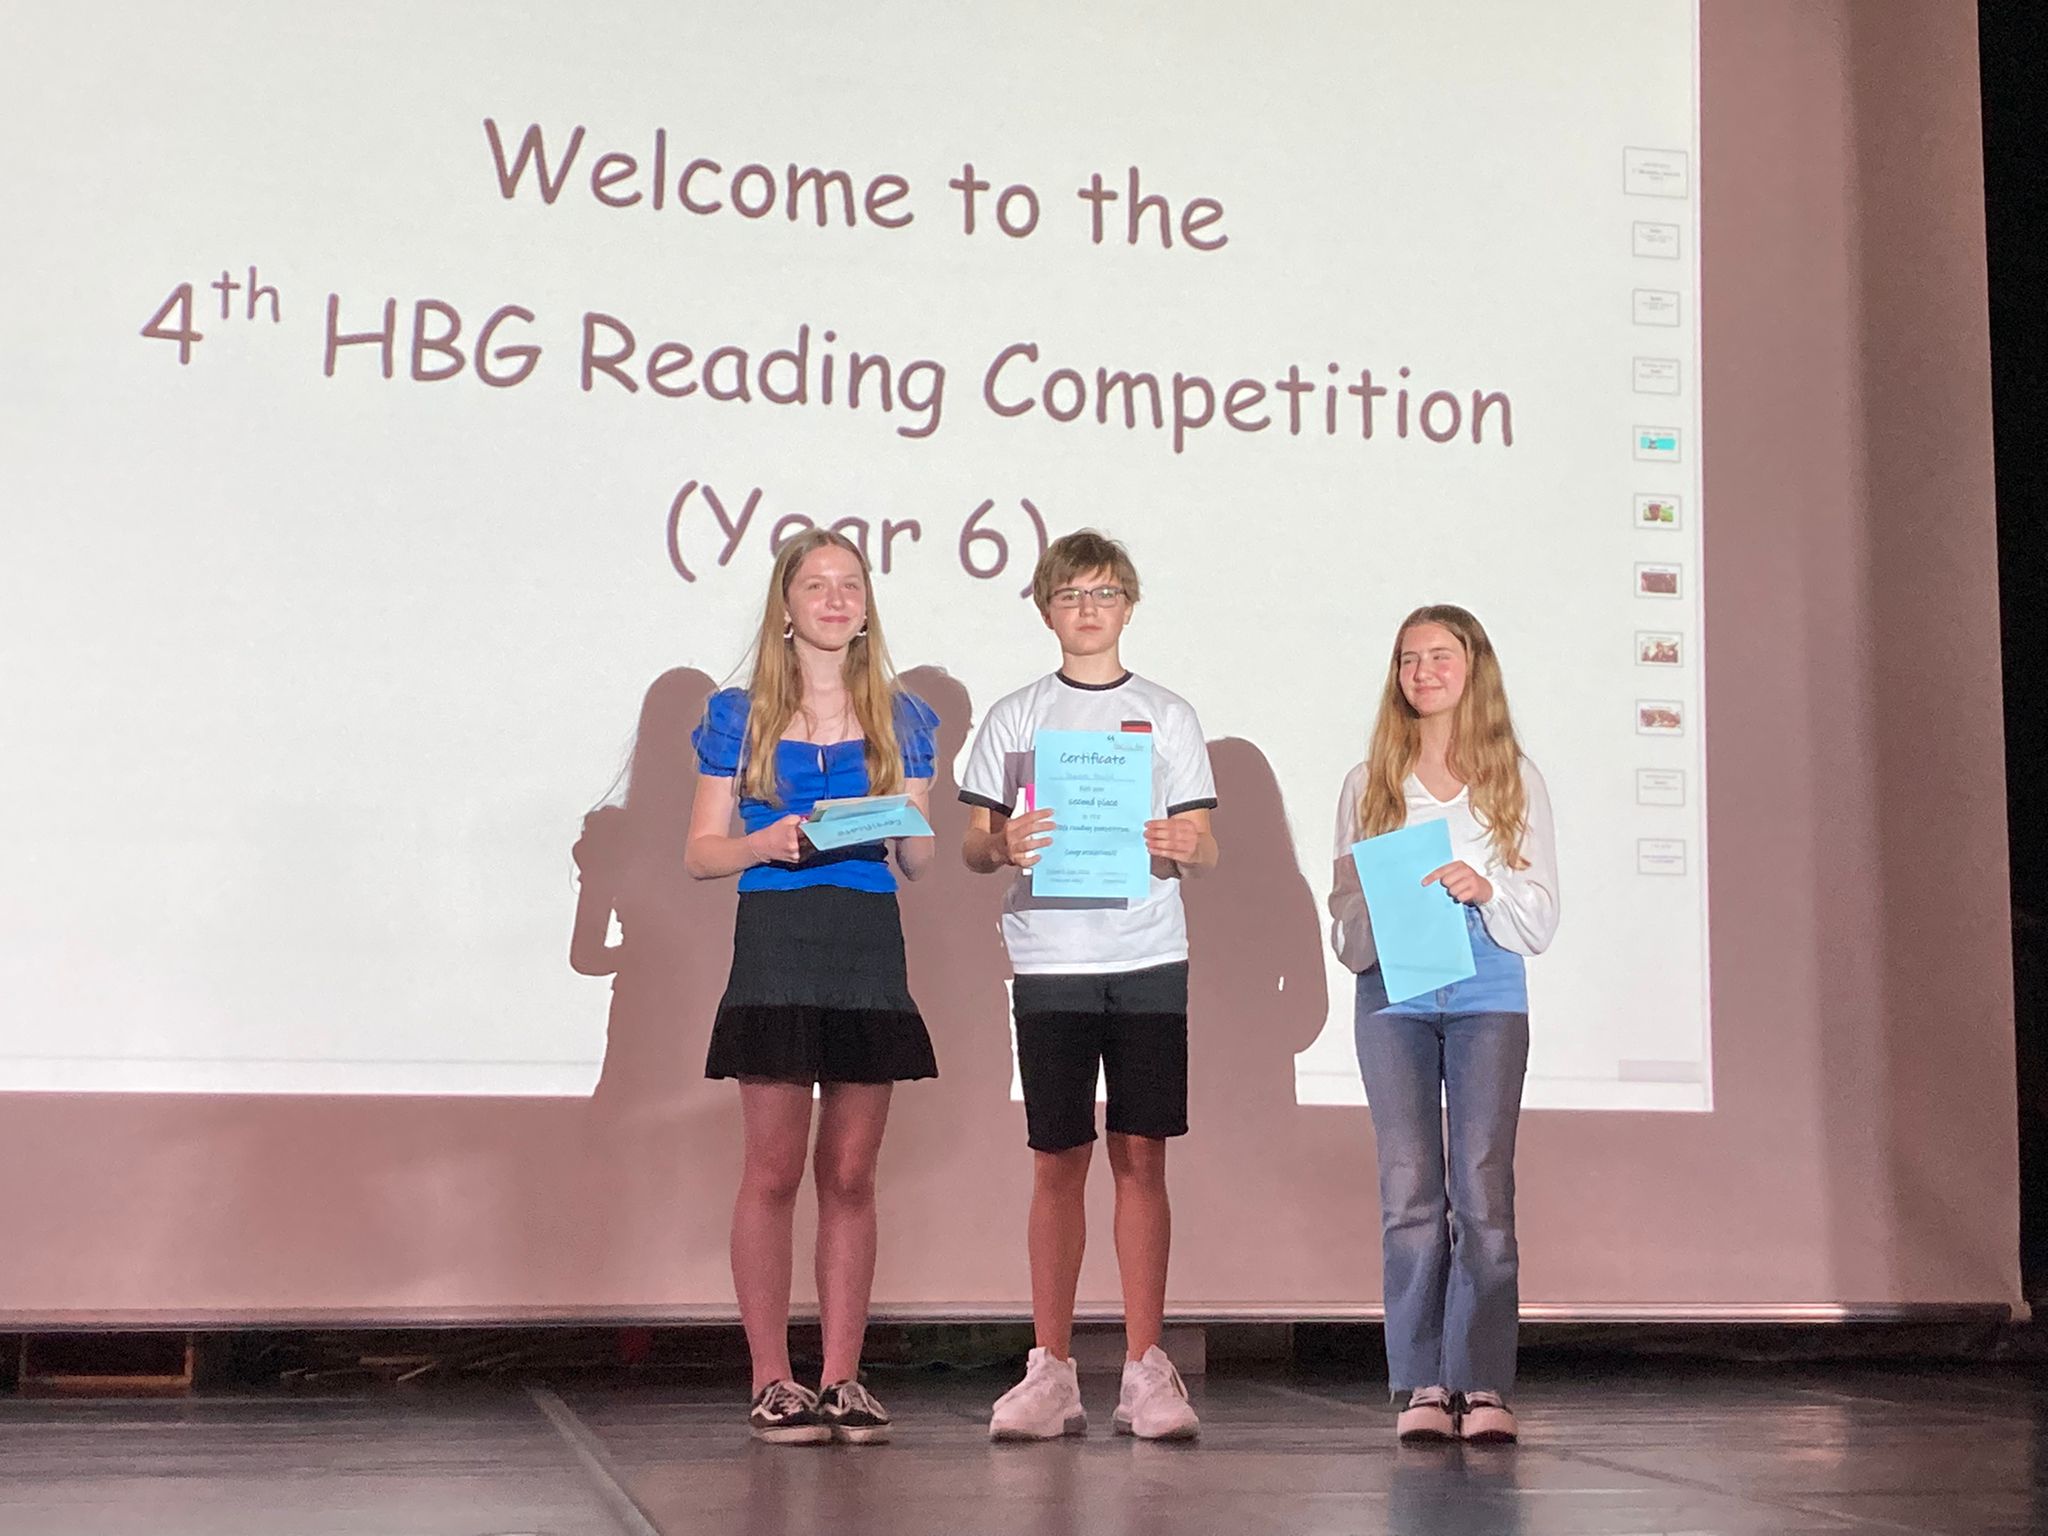 4th HBG Reading Competition